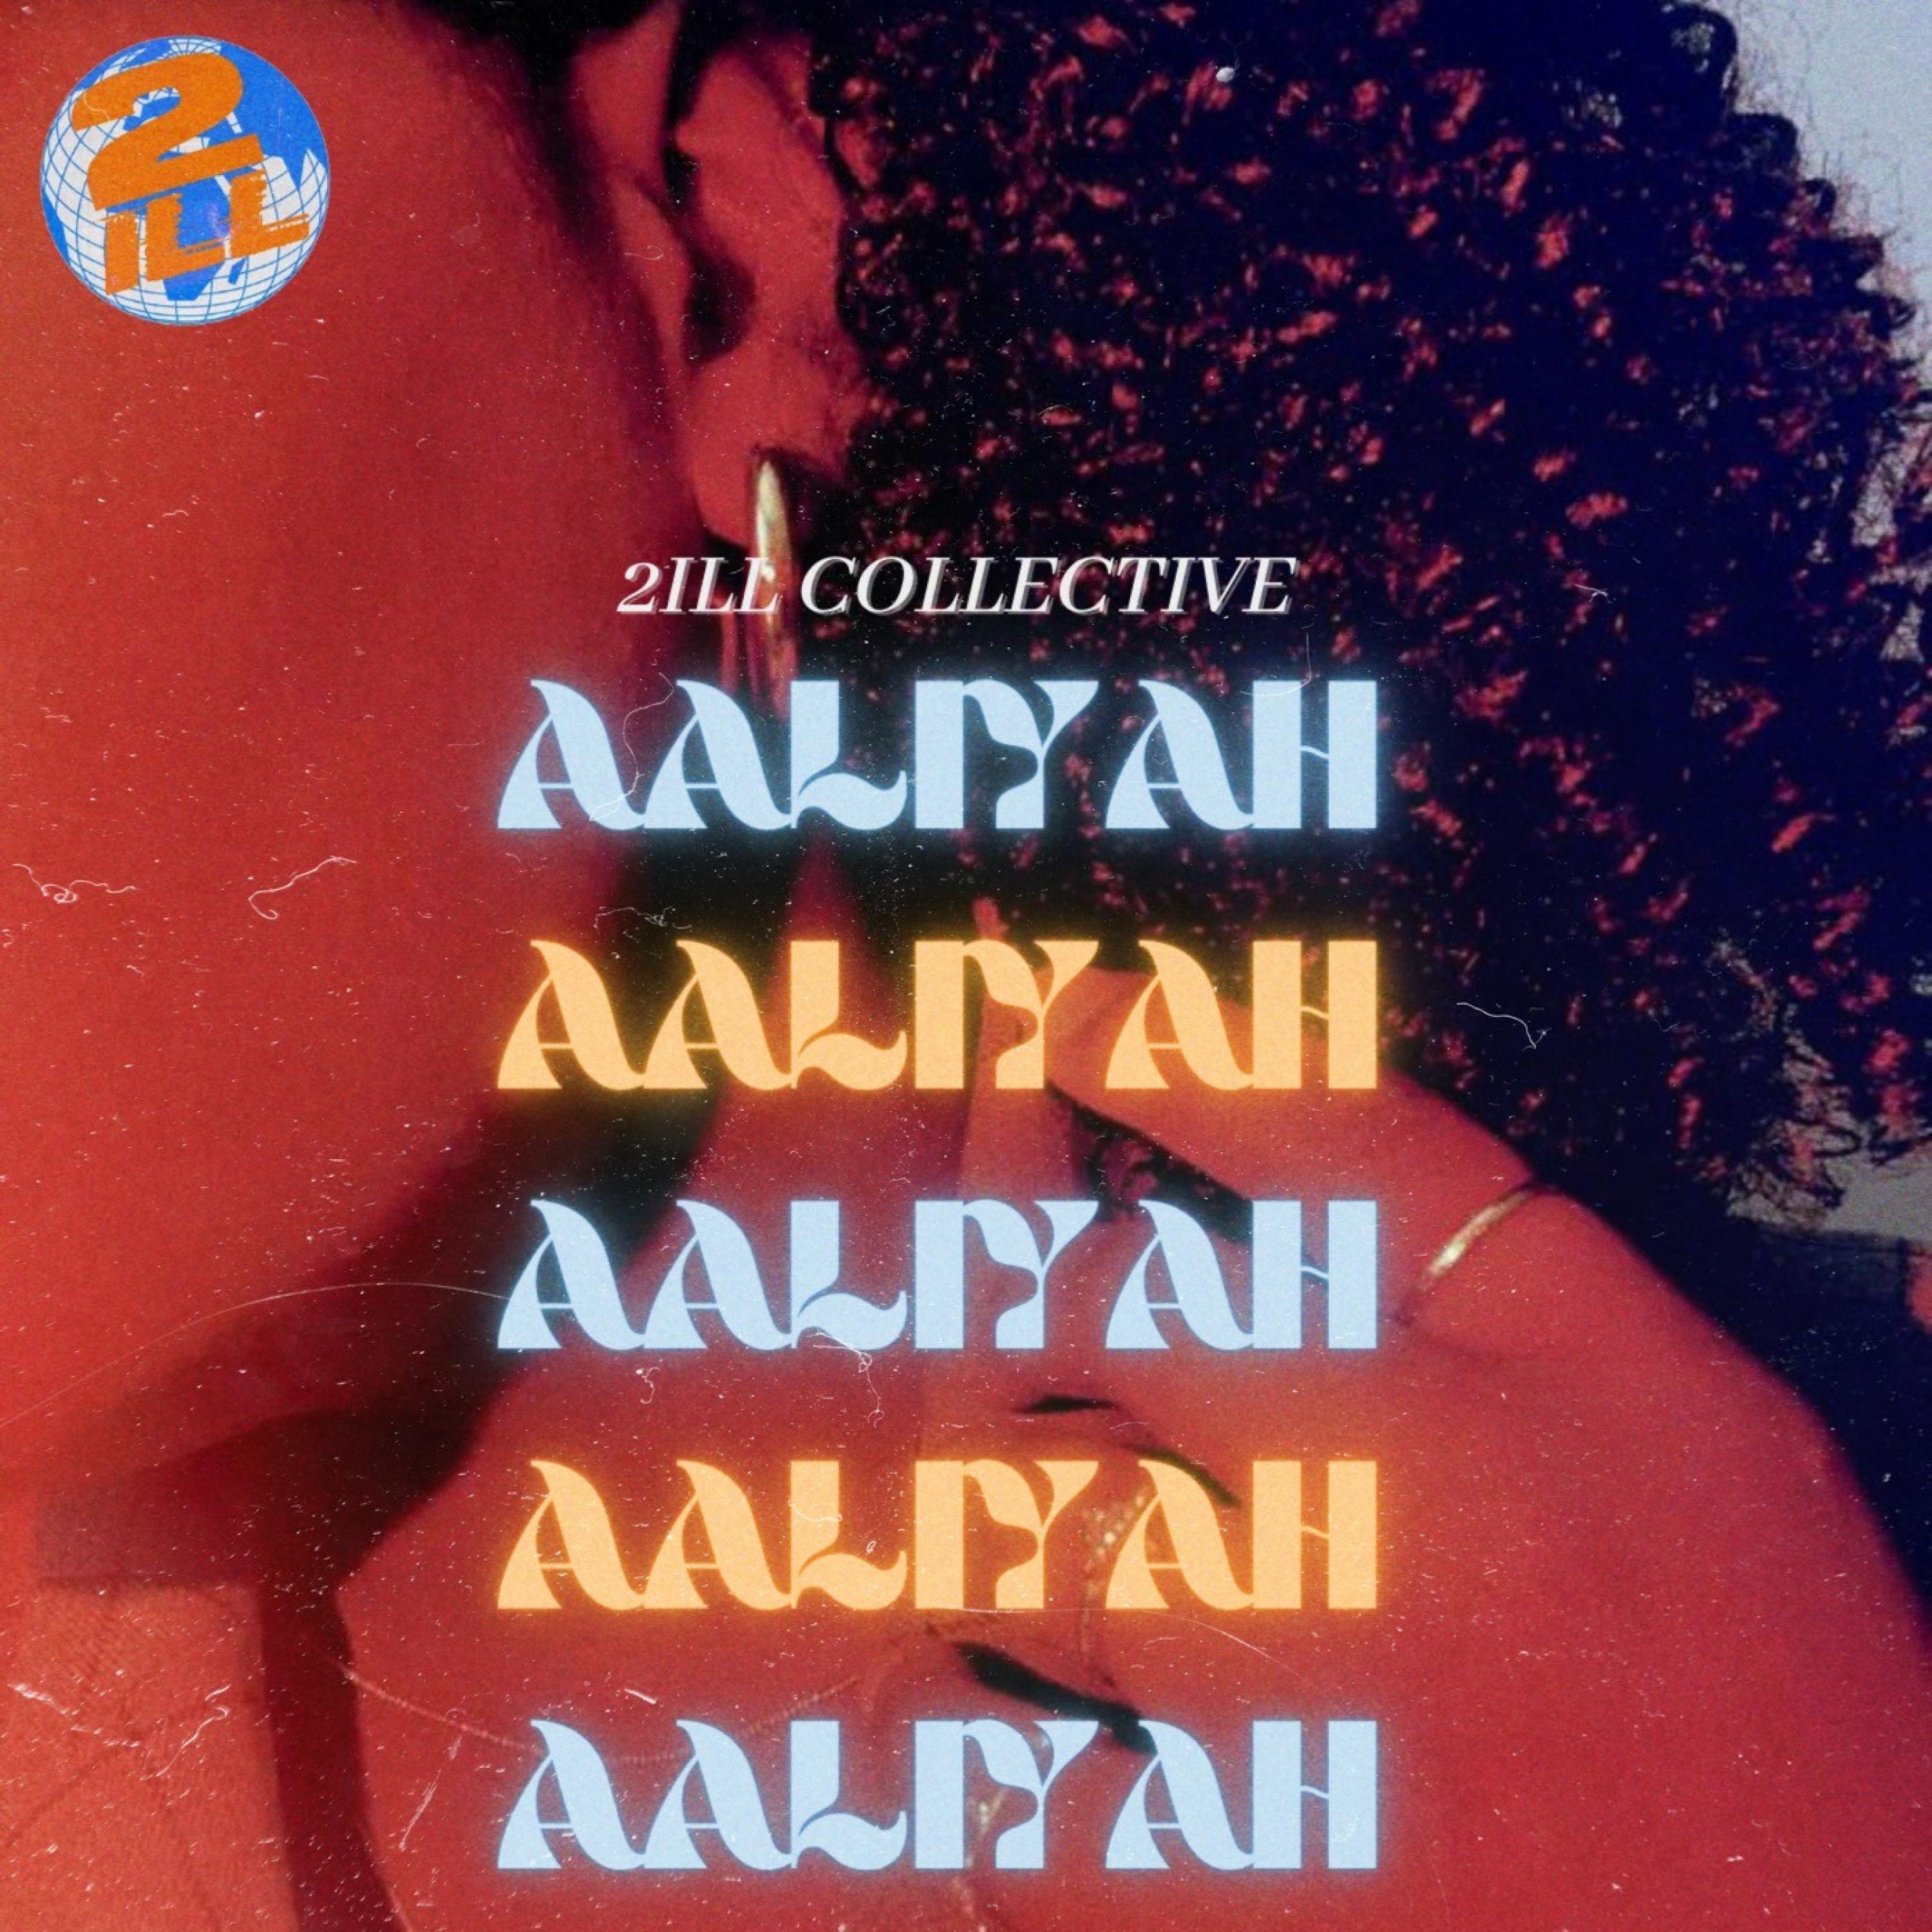 2ill Collective - Aayliah (feat. Coties, LucidSoLooney, Young Majestic Artist & RobMixedIt)